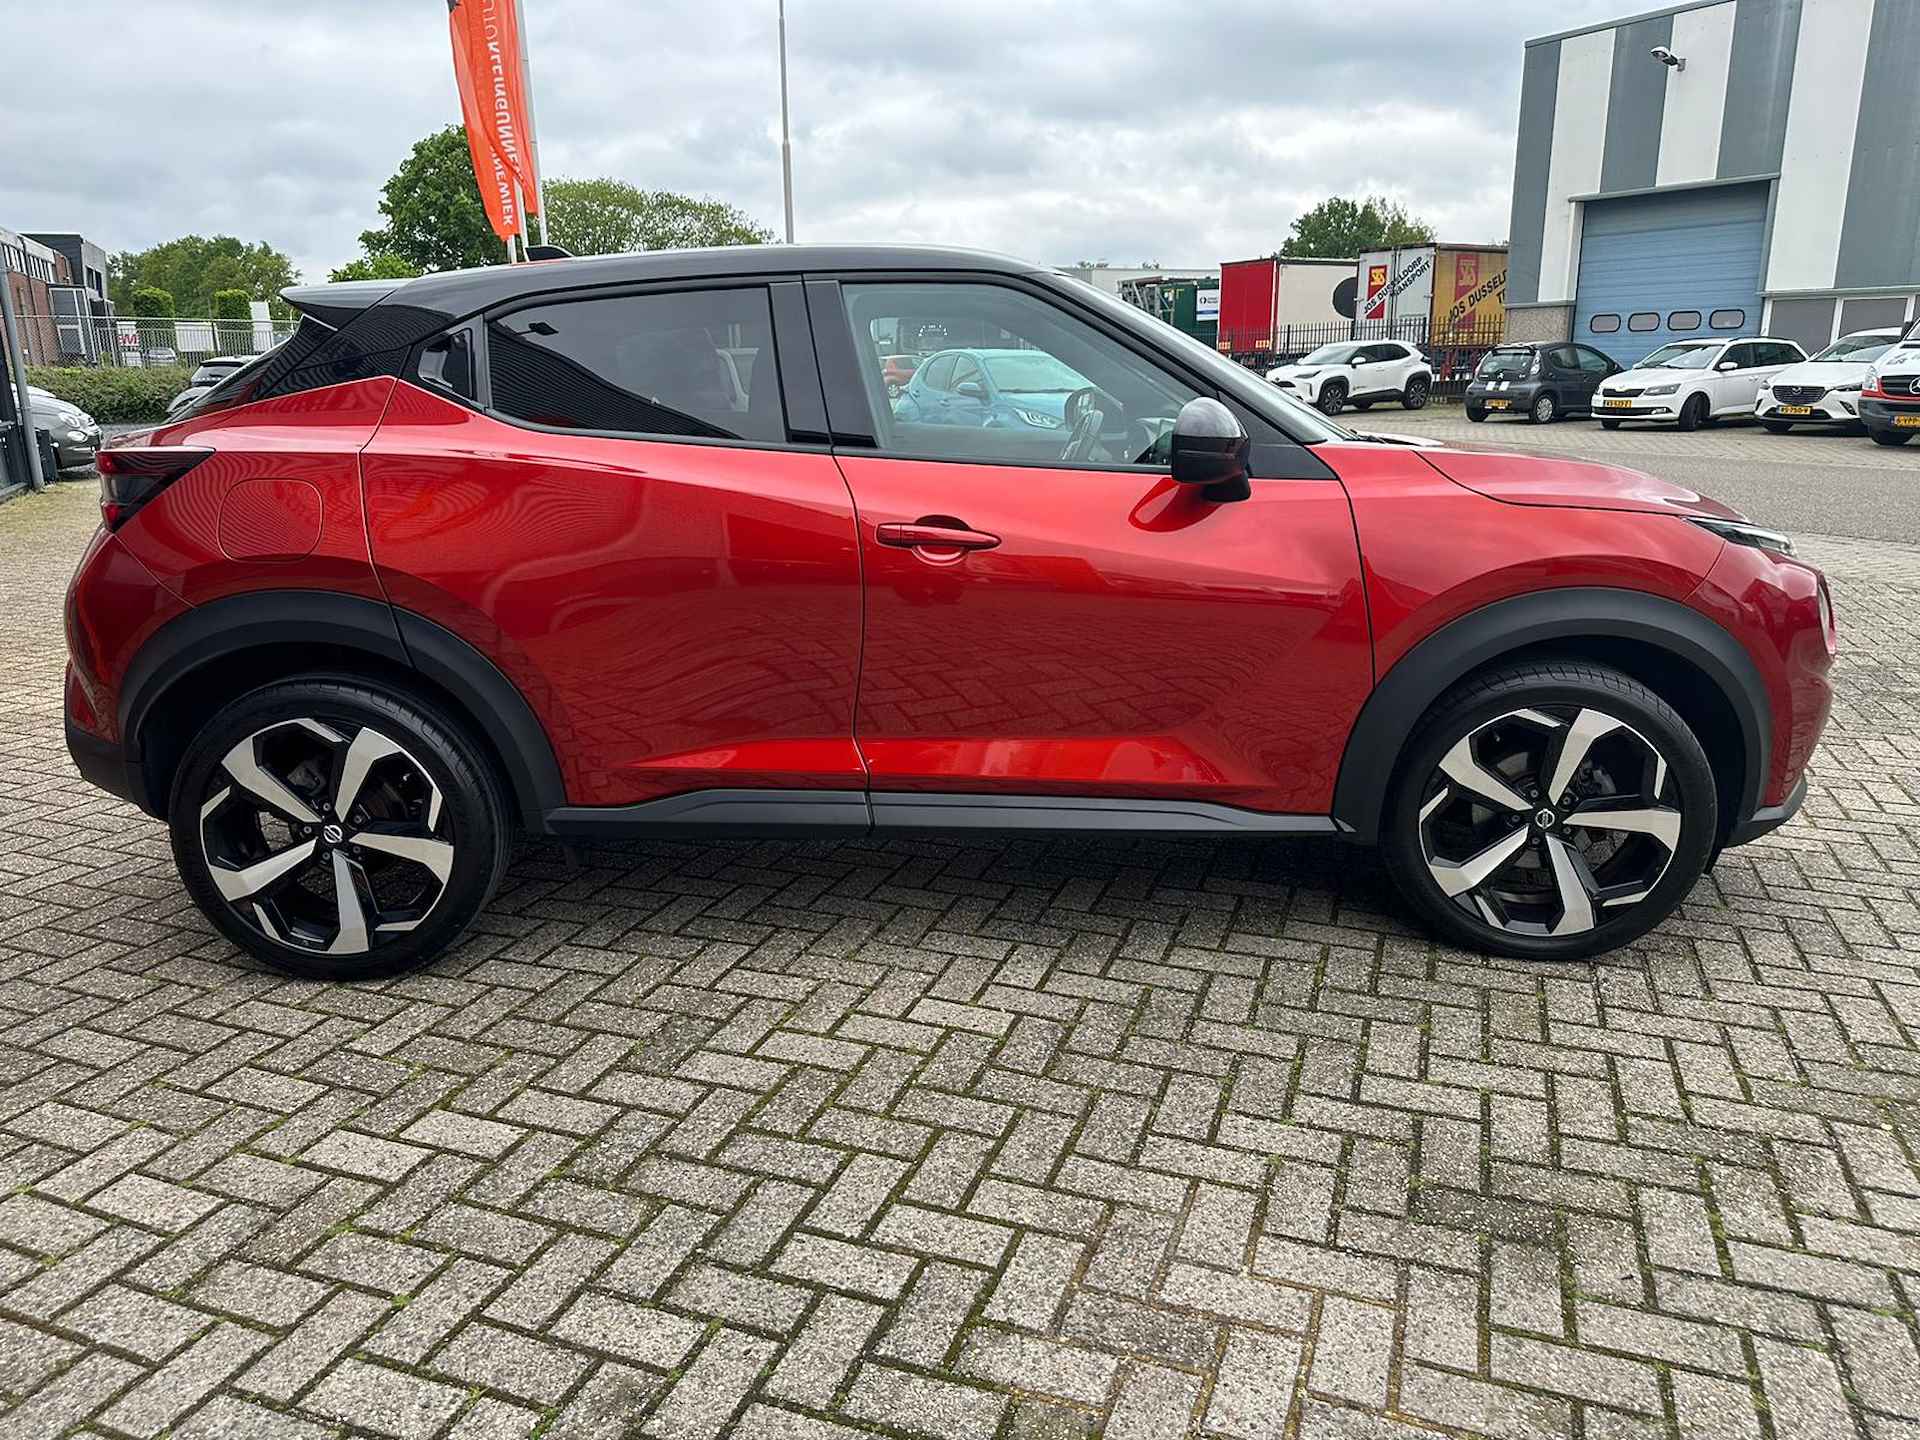 Nissan Juke 1.0 DIG-T Premiere Edition Automaat Apple/Android Carply / Navi / Camera / 19 inch / Cruise Control / Keyless / Start/stop - 8/25